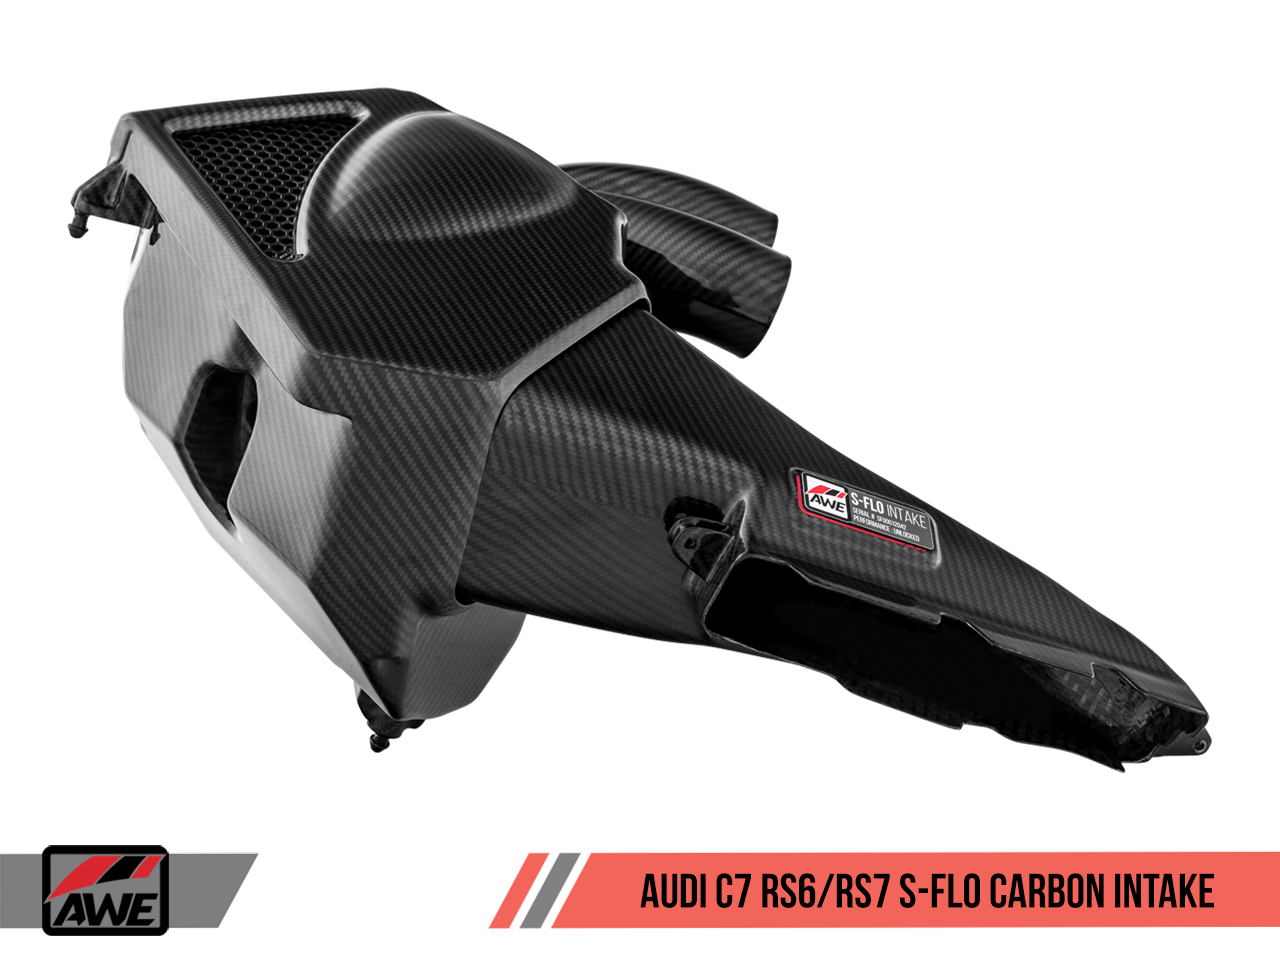 AWE S-FLO Carbon Intake for Audi C7 RS 6 / RS 7 - 0